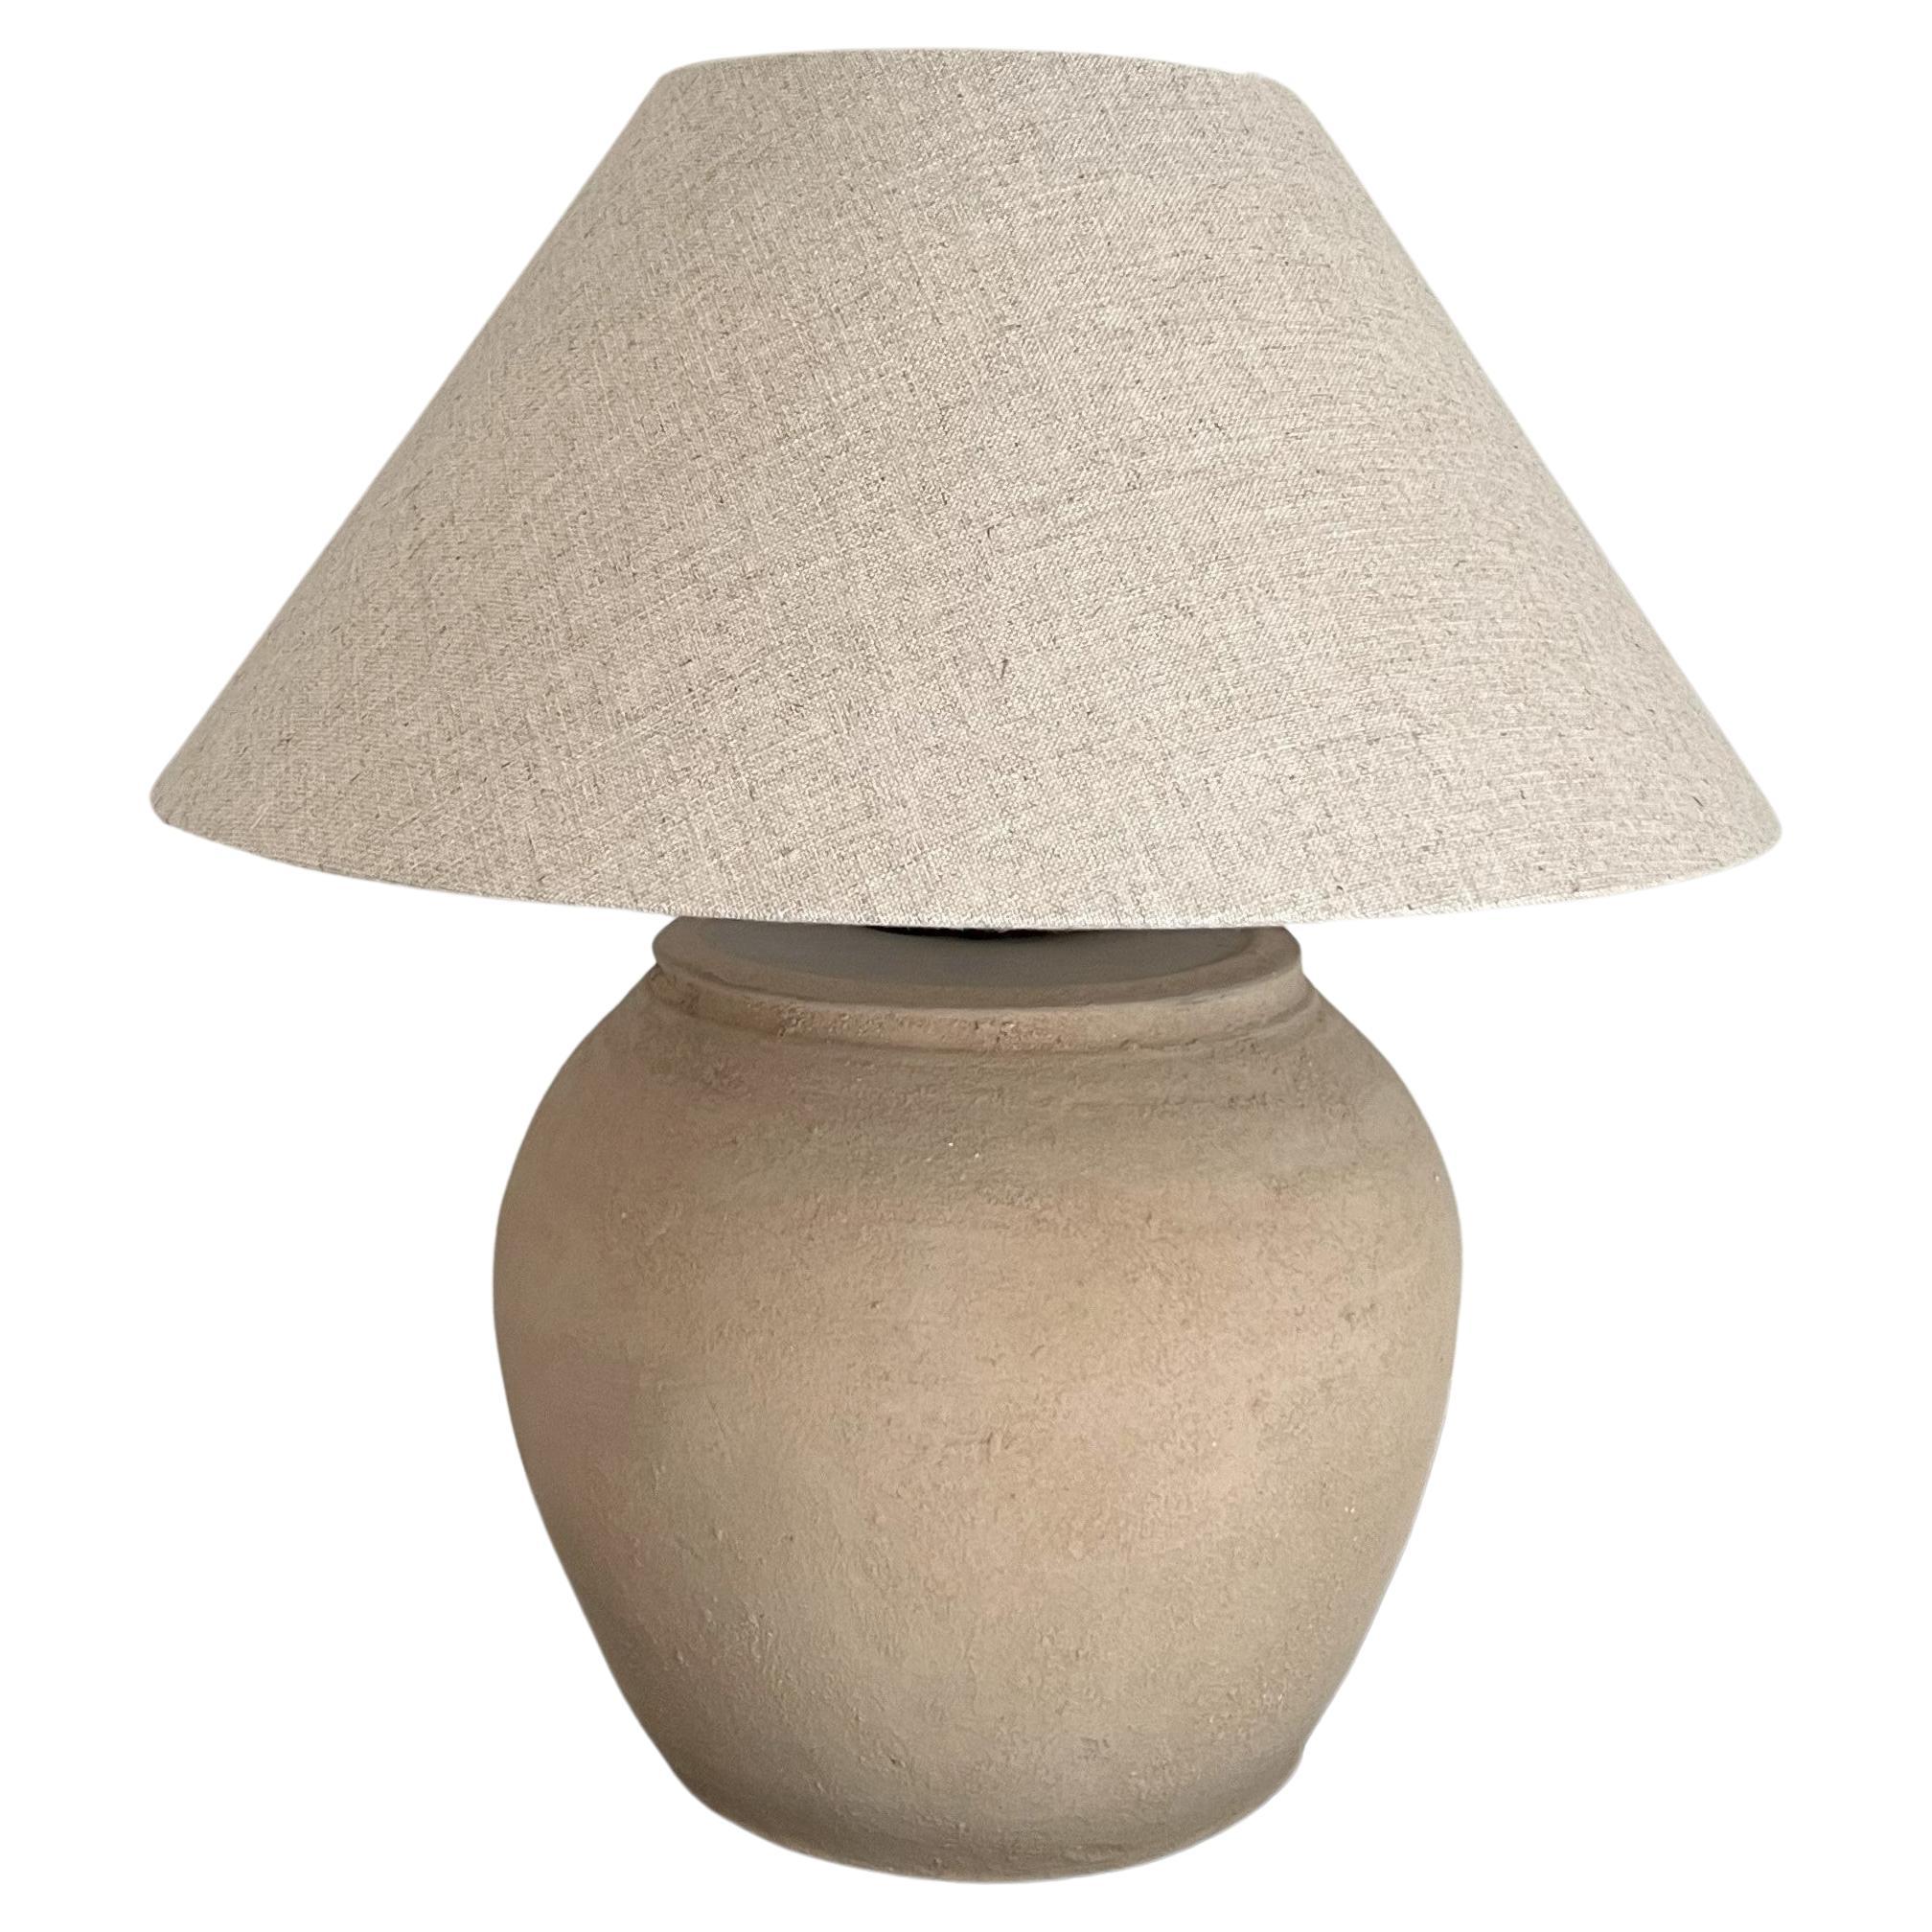 Han Style Sandcolor Vase Table Lamp For Sale